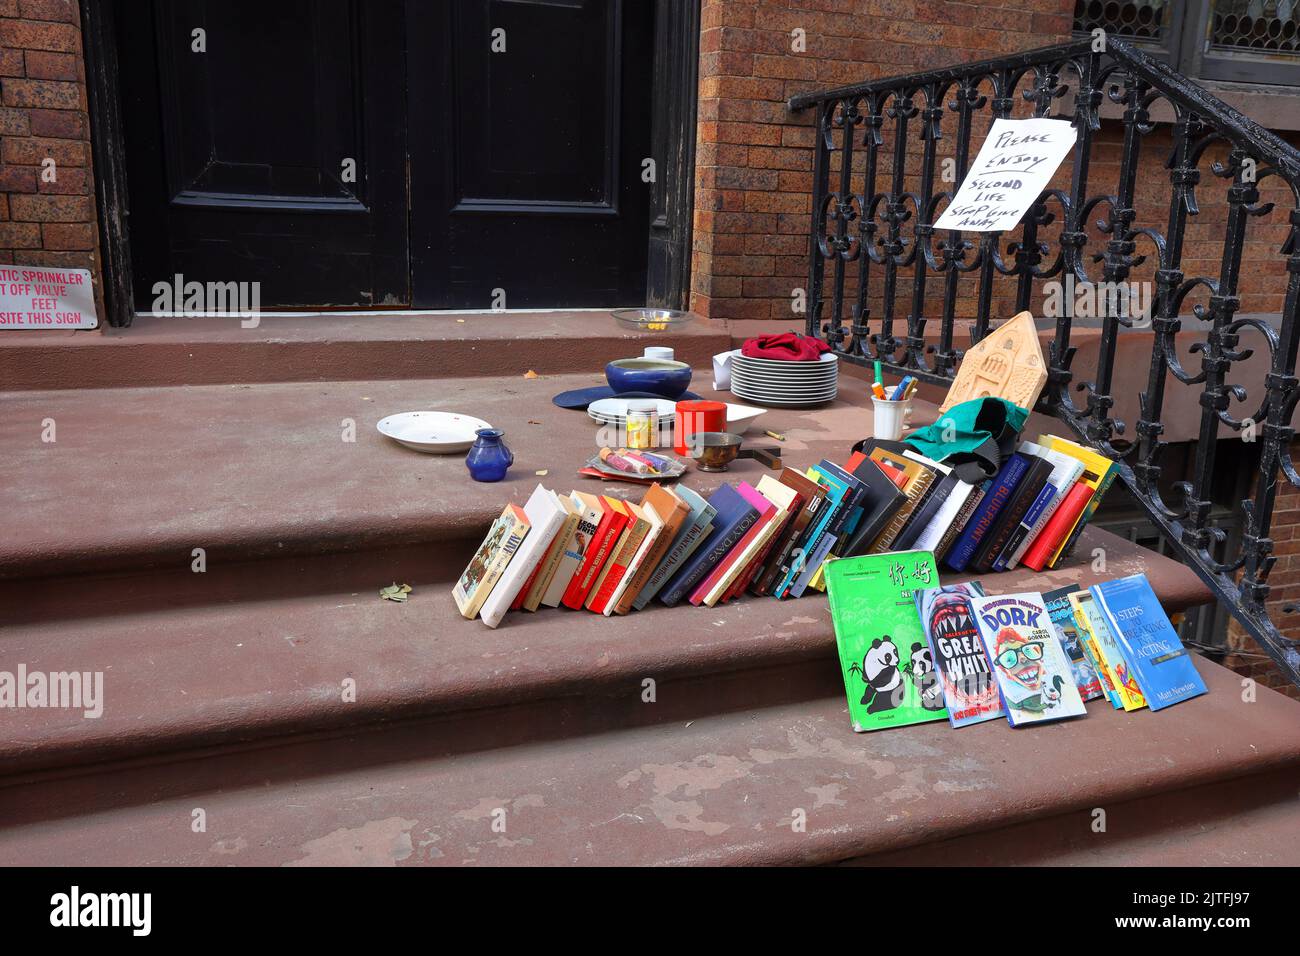 Books, bric-a-brac, and other free items on the stairs of a brownstone townhouse in New York for people looking for free stuff stooping or curb mining Stock Photo